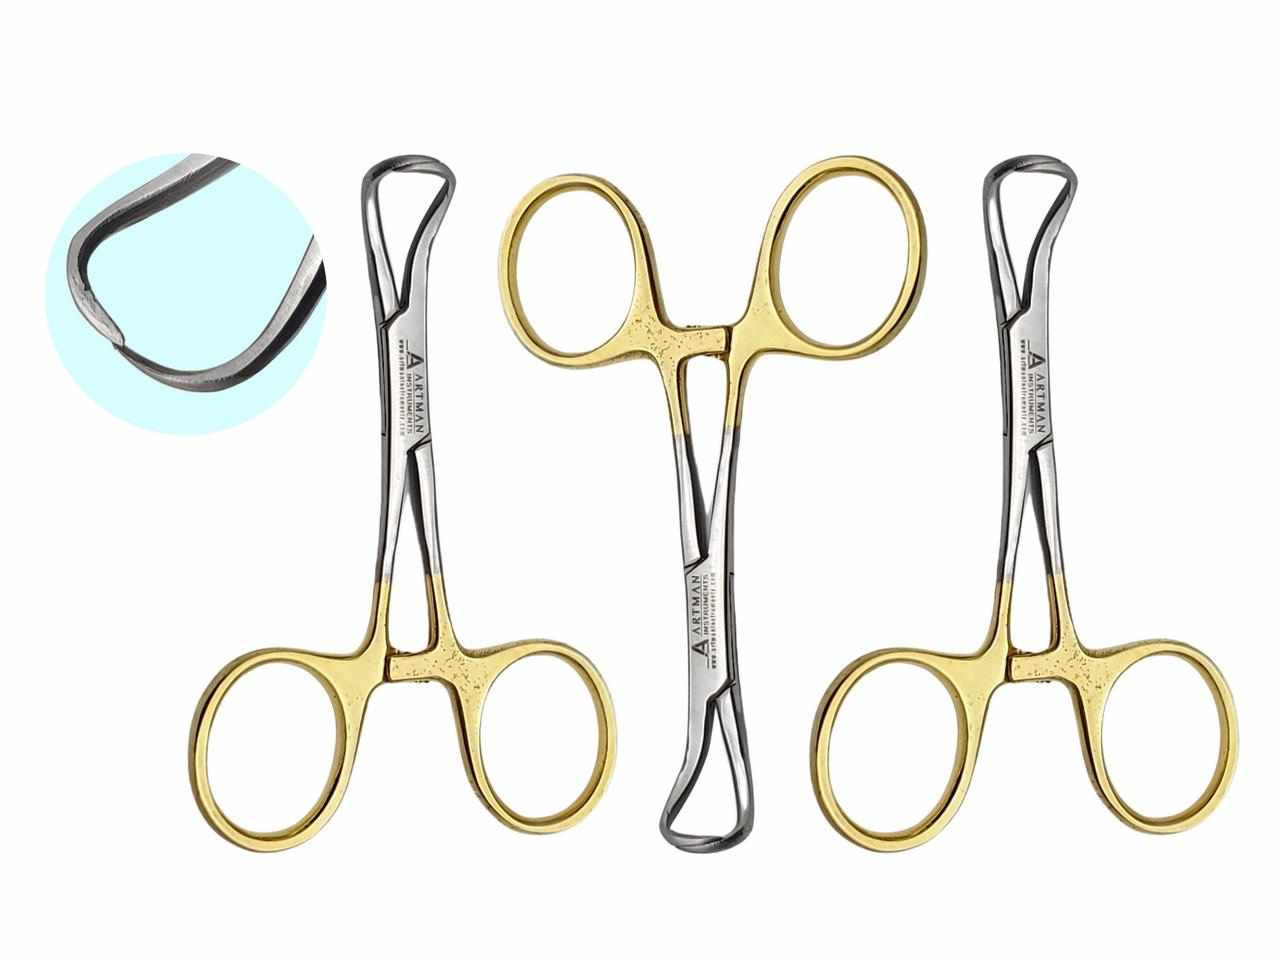 Towel Clamp Backhaus Forceps Gold Plated 3.5" Set of 3 ARTMAN